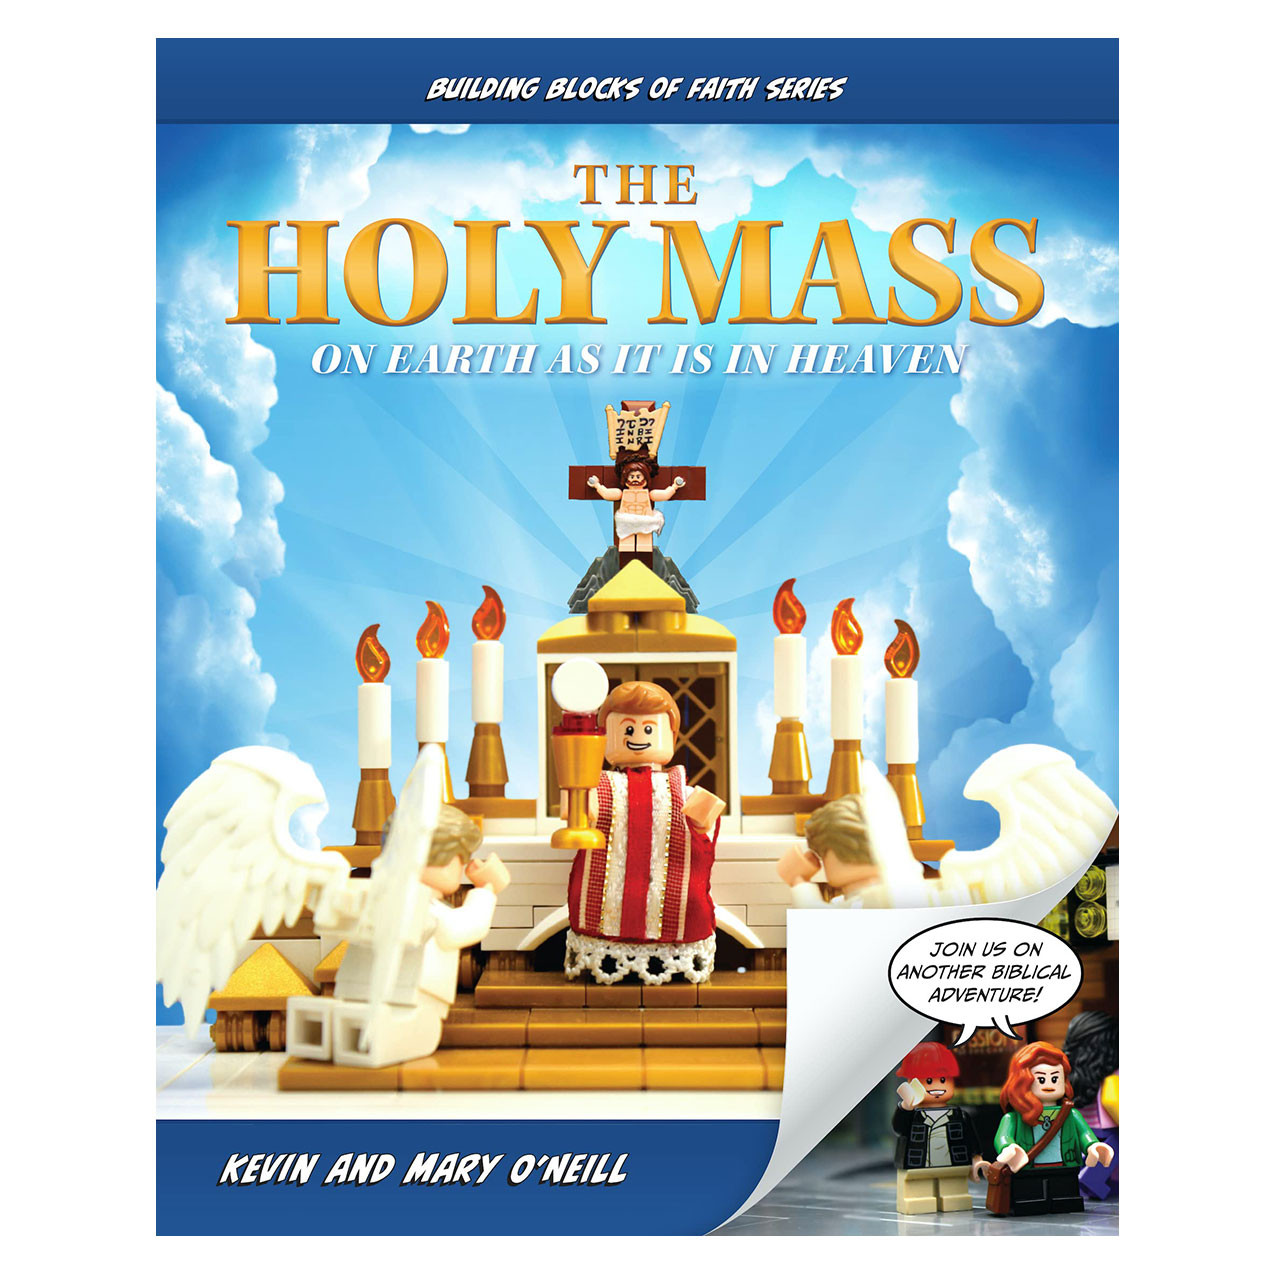 The Holy Mass: On Earth as it is in Heaven